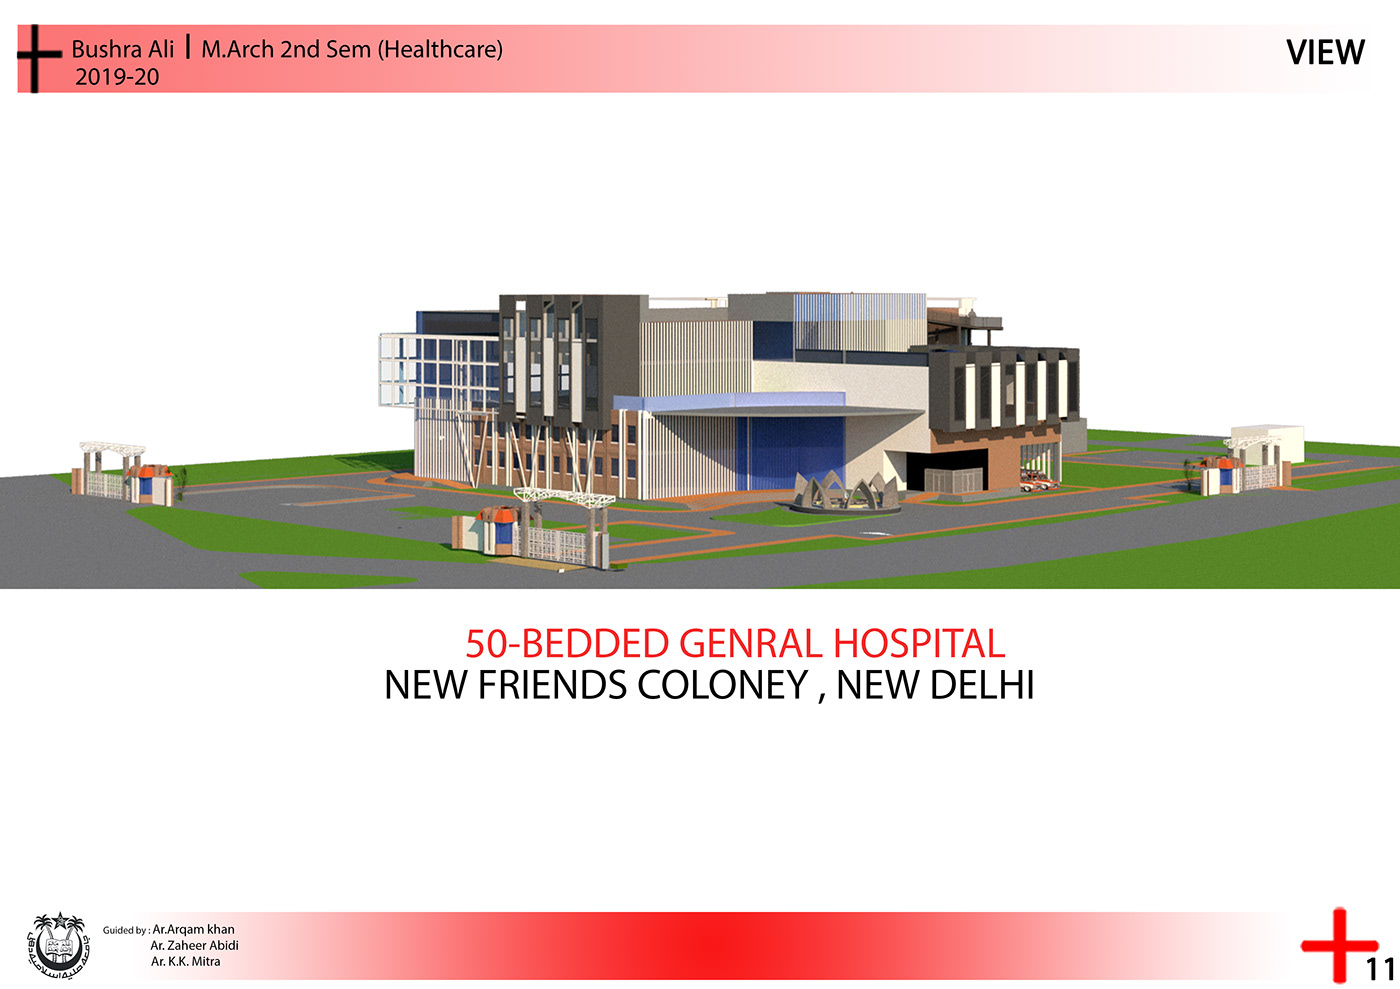 50-Bedded Hospital architecture economical general hospital healthcare architecture Hospital Design New Delhi Sustainable